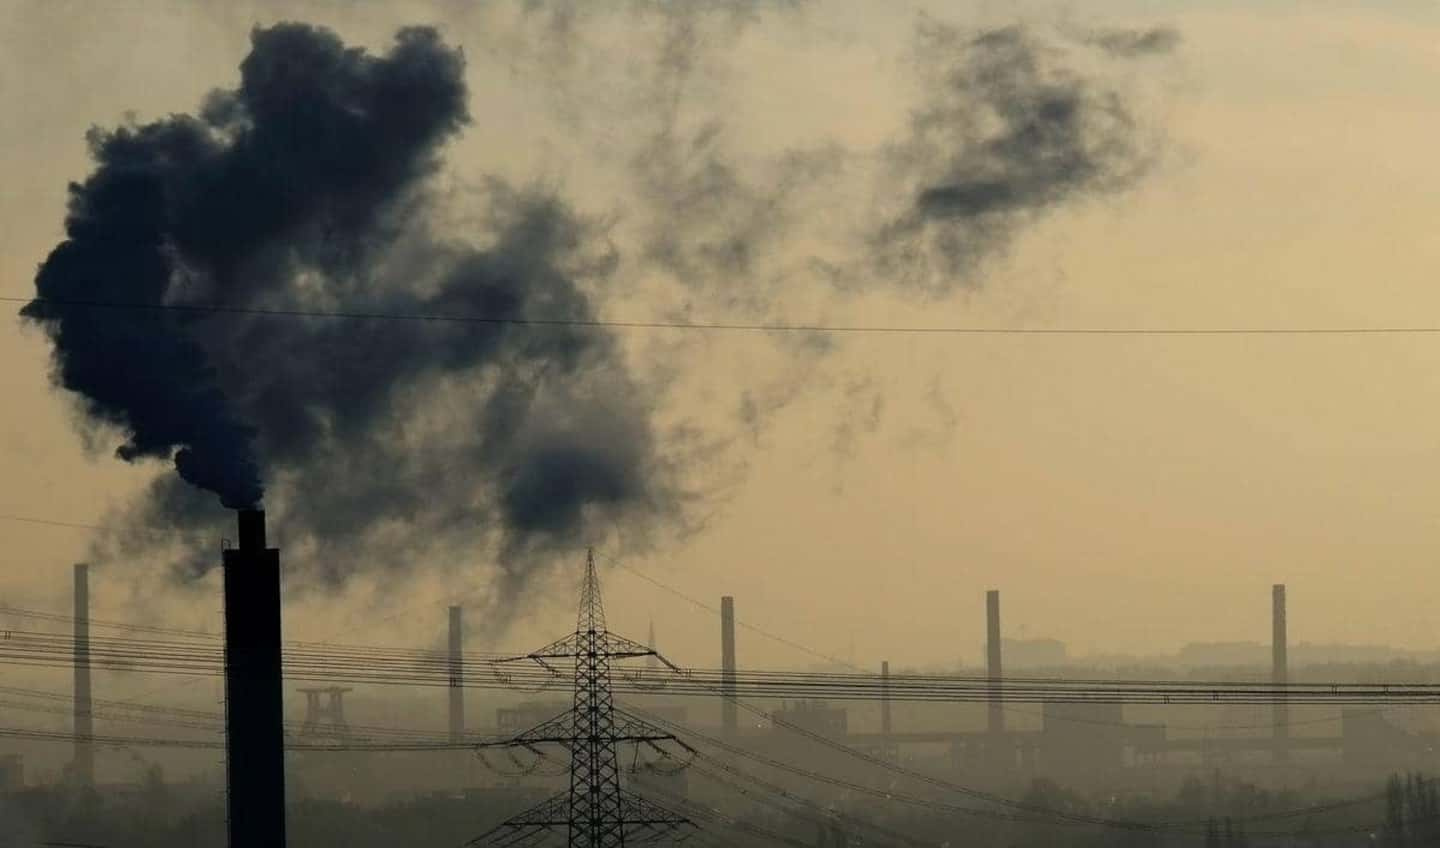 The level of CO2 in the air 50% higher than before the industrial era